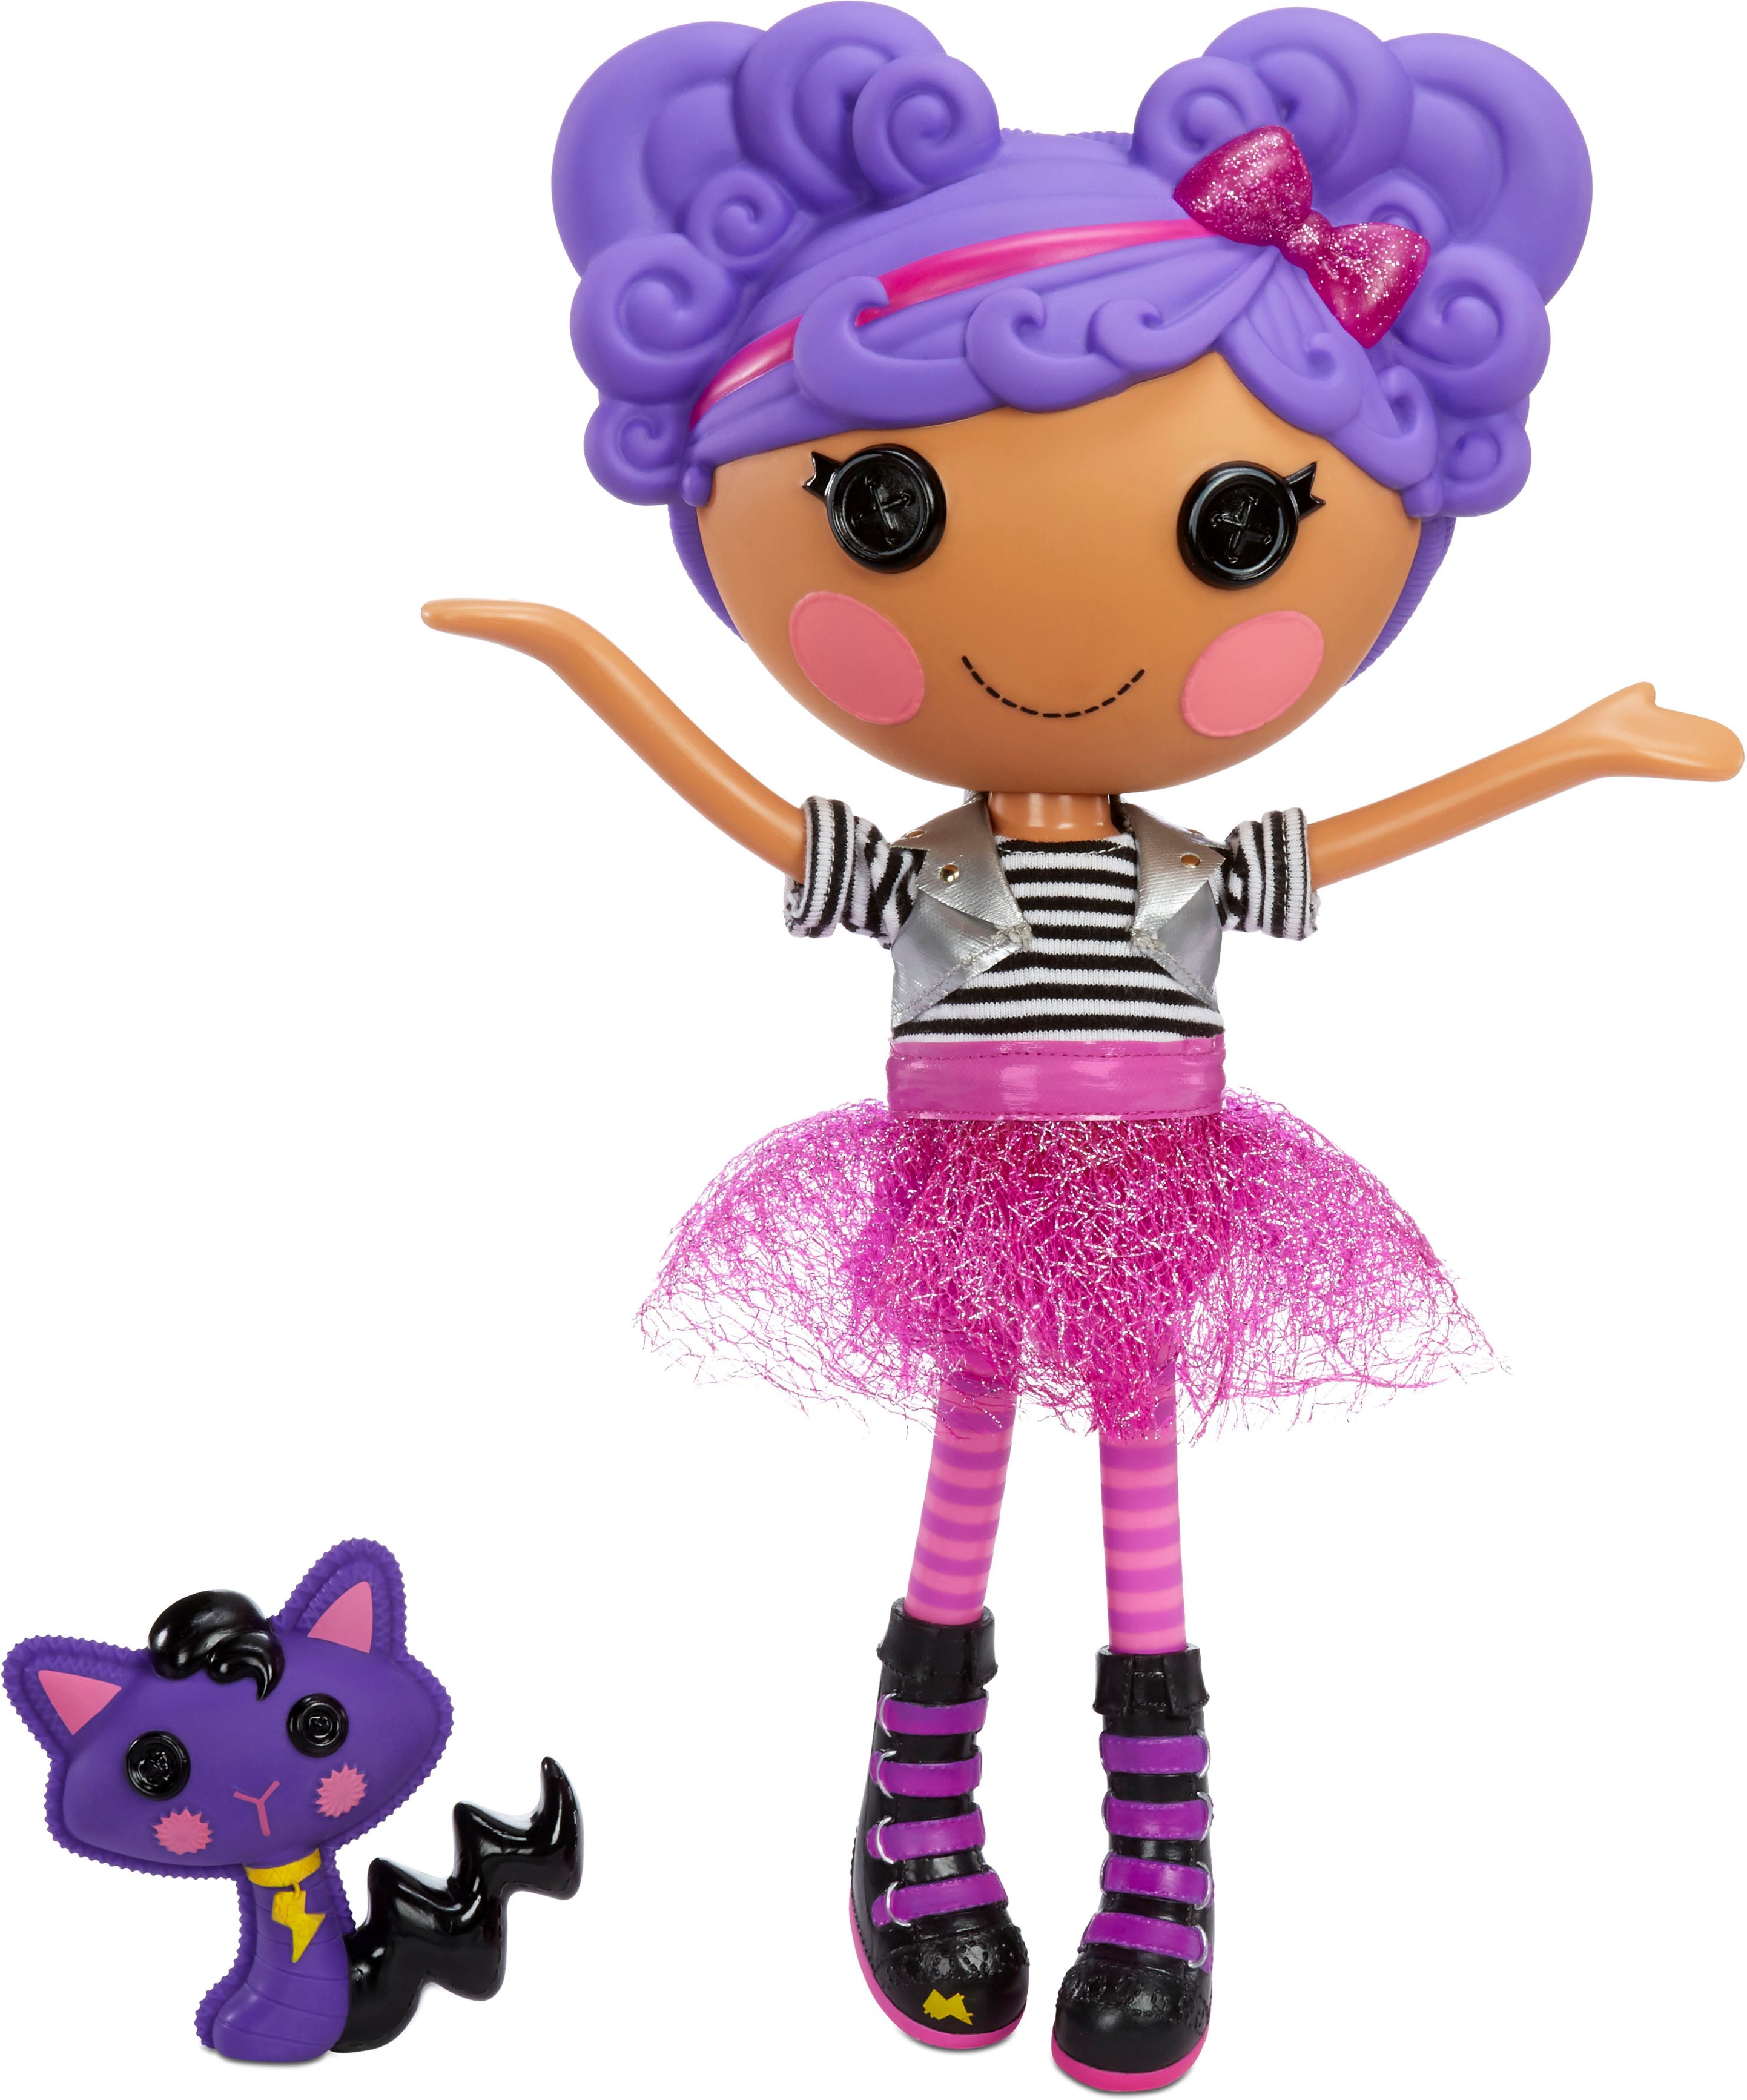 Angle View: Lalaloopsy Doll - Storm E. Sky with Pet Cool Cat, 13" Rocker Musician Purple Doll with Changeable Pink and Black Outfit and Shoes, in Reusable Camper House Package Playset, for Ages 3-103